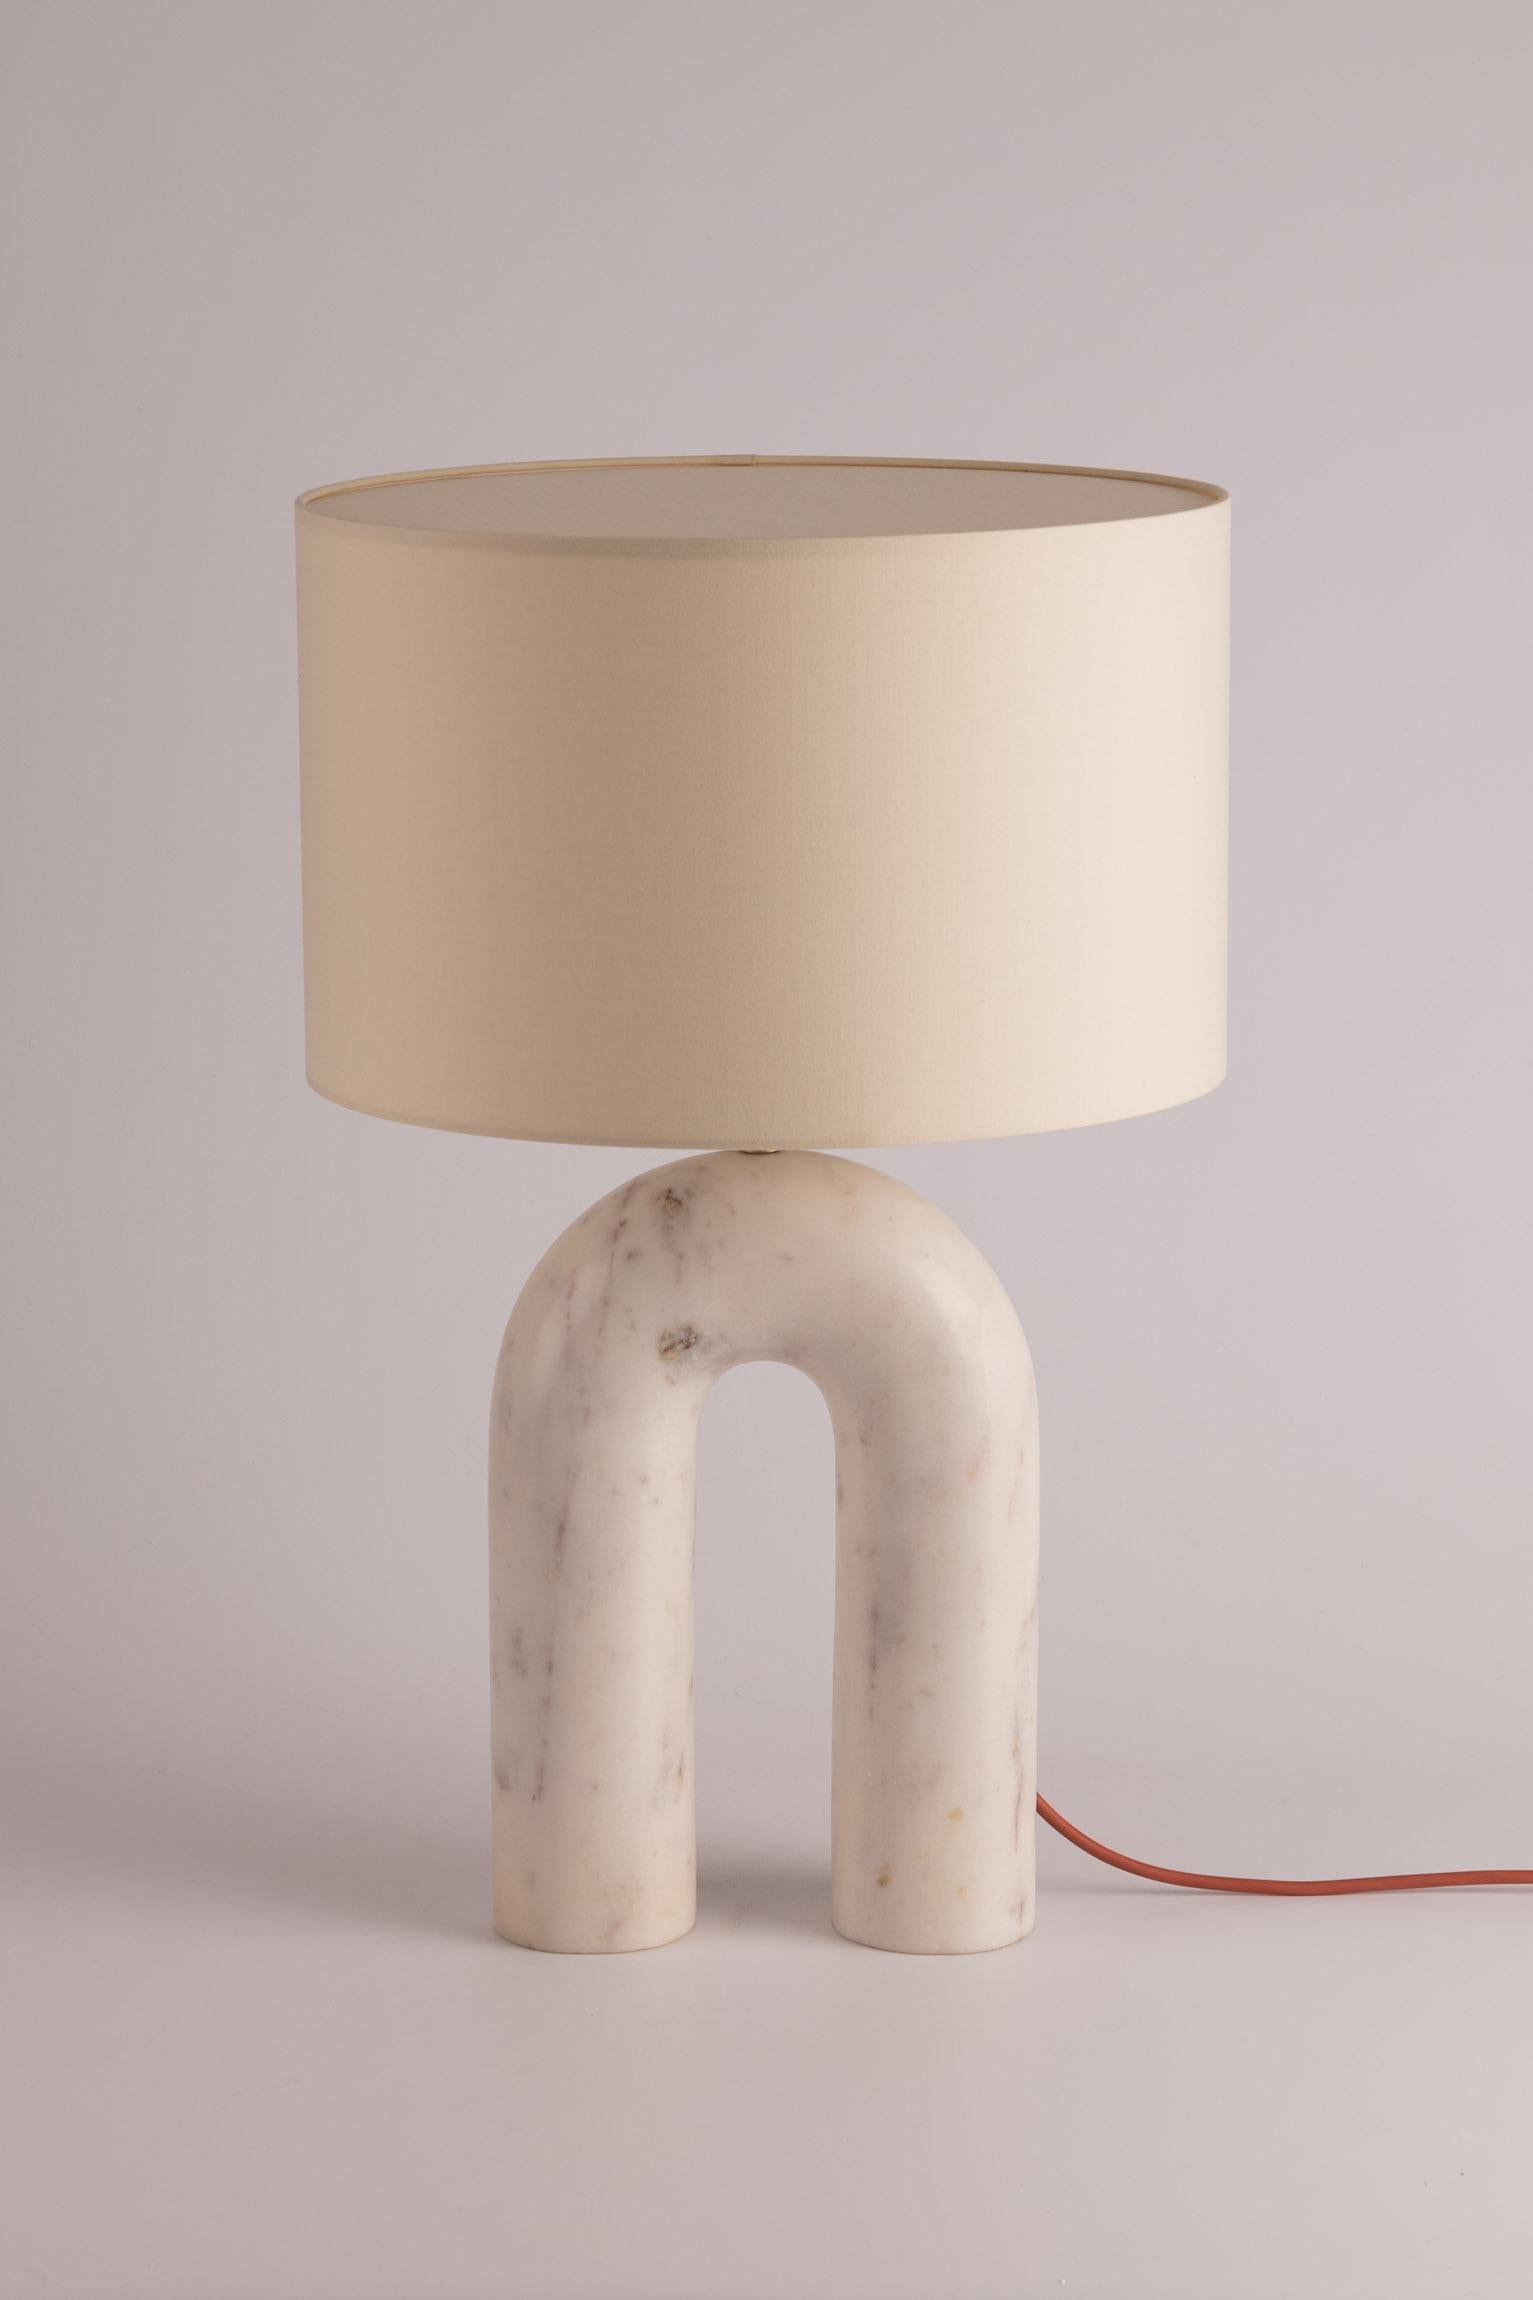 White Marble Arko Table Lamp by Simone & Marcel
Dimensions: Ø 40 x H 67 cm.
Materials: Cotton lampshade and white marble.

Also available in different marbles and ceramics. Custom options available on request. Please contact us. 

All our lamps can